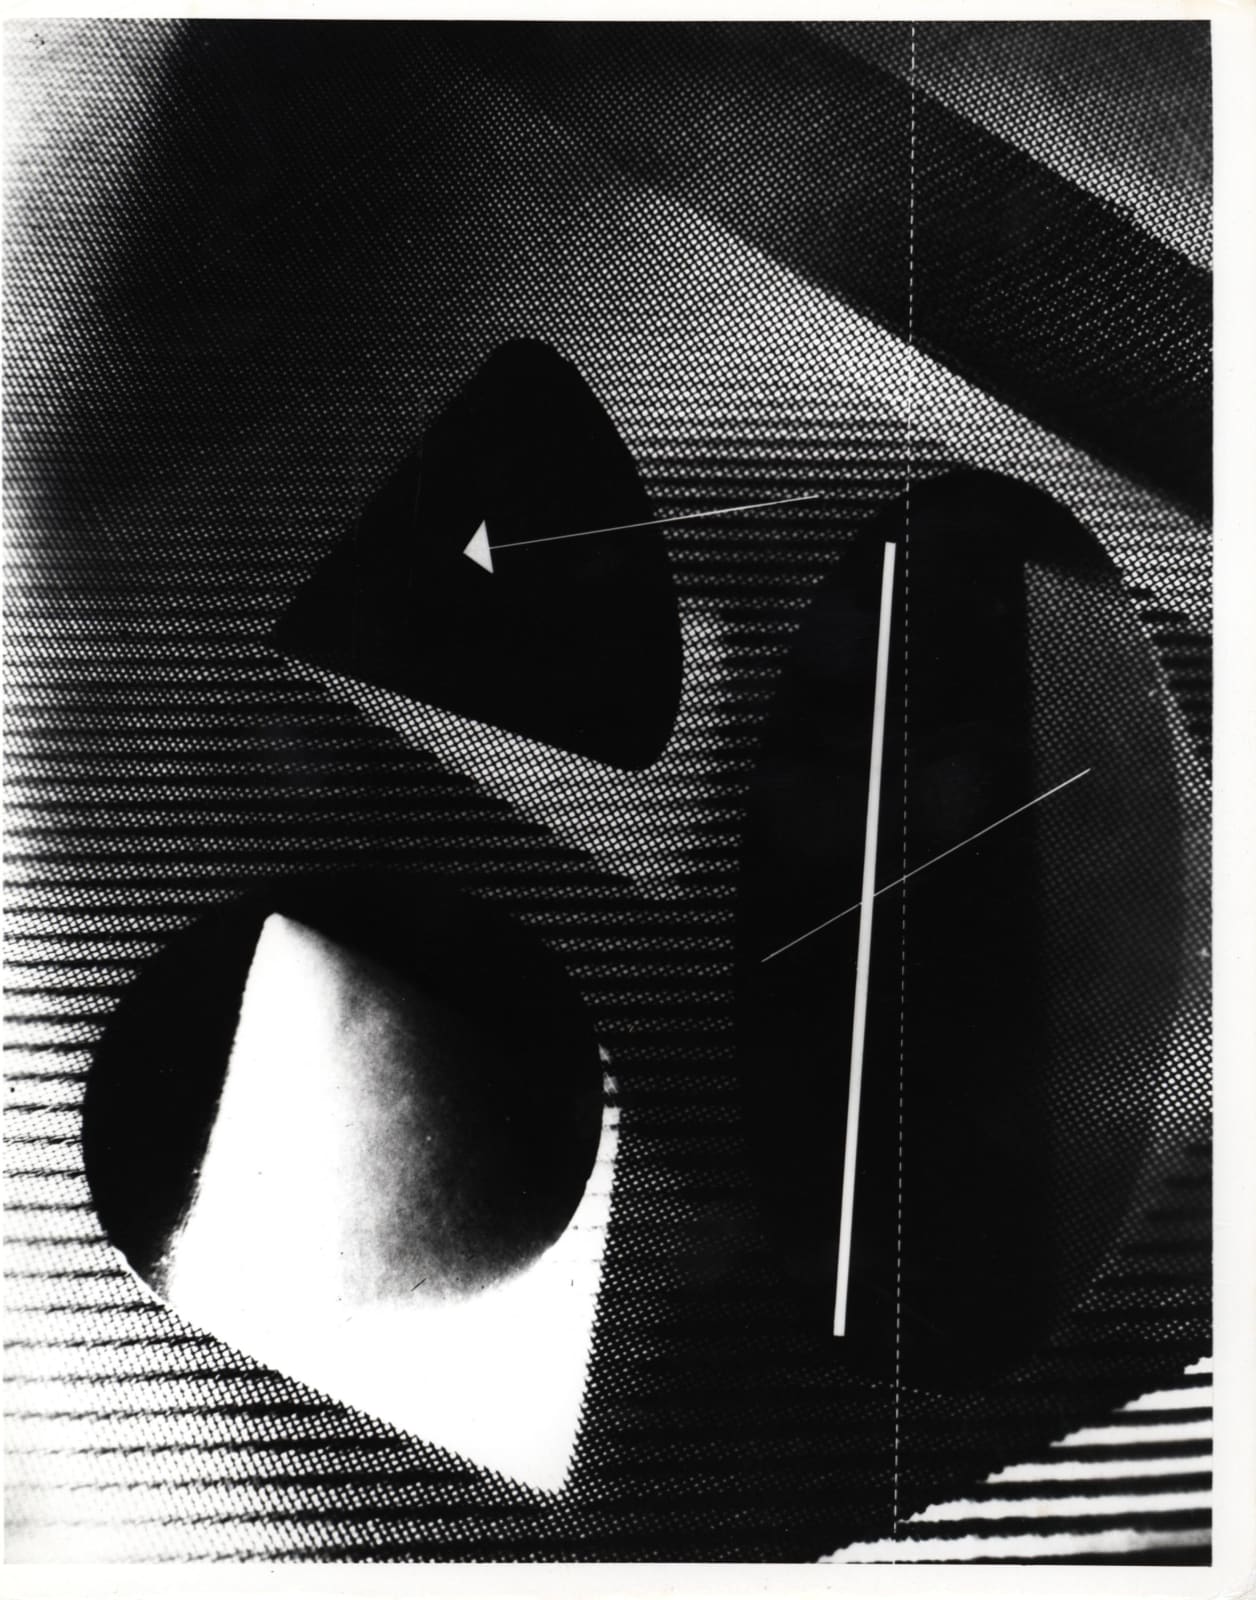 György Kepes, Cones and patterns (photogram), 1939/1965